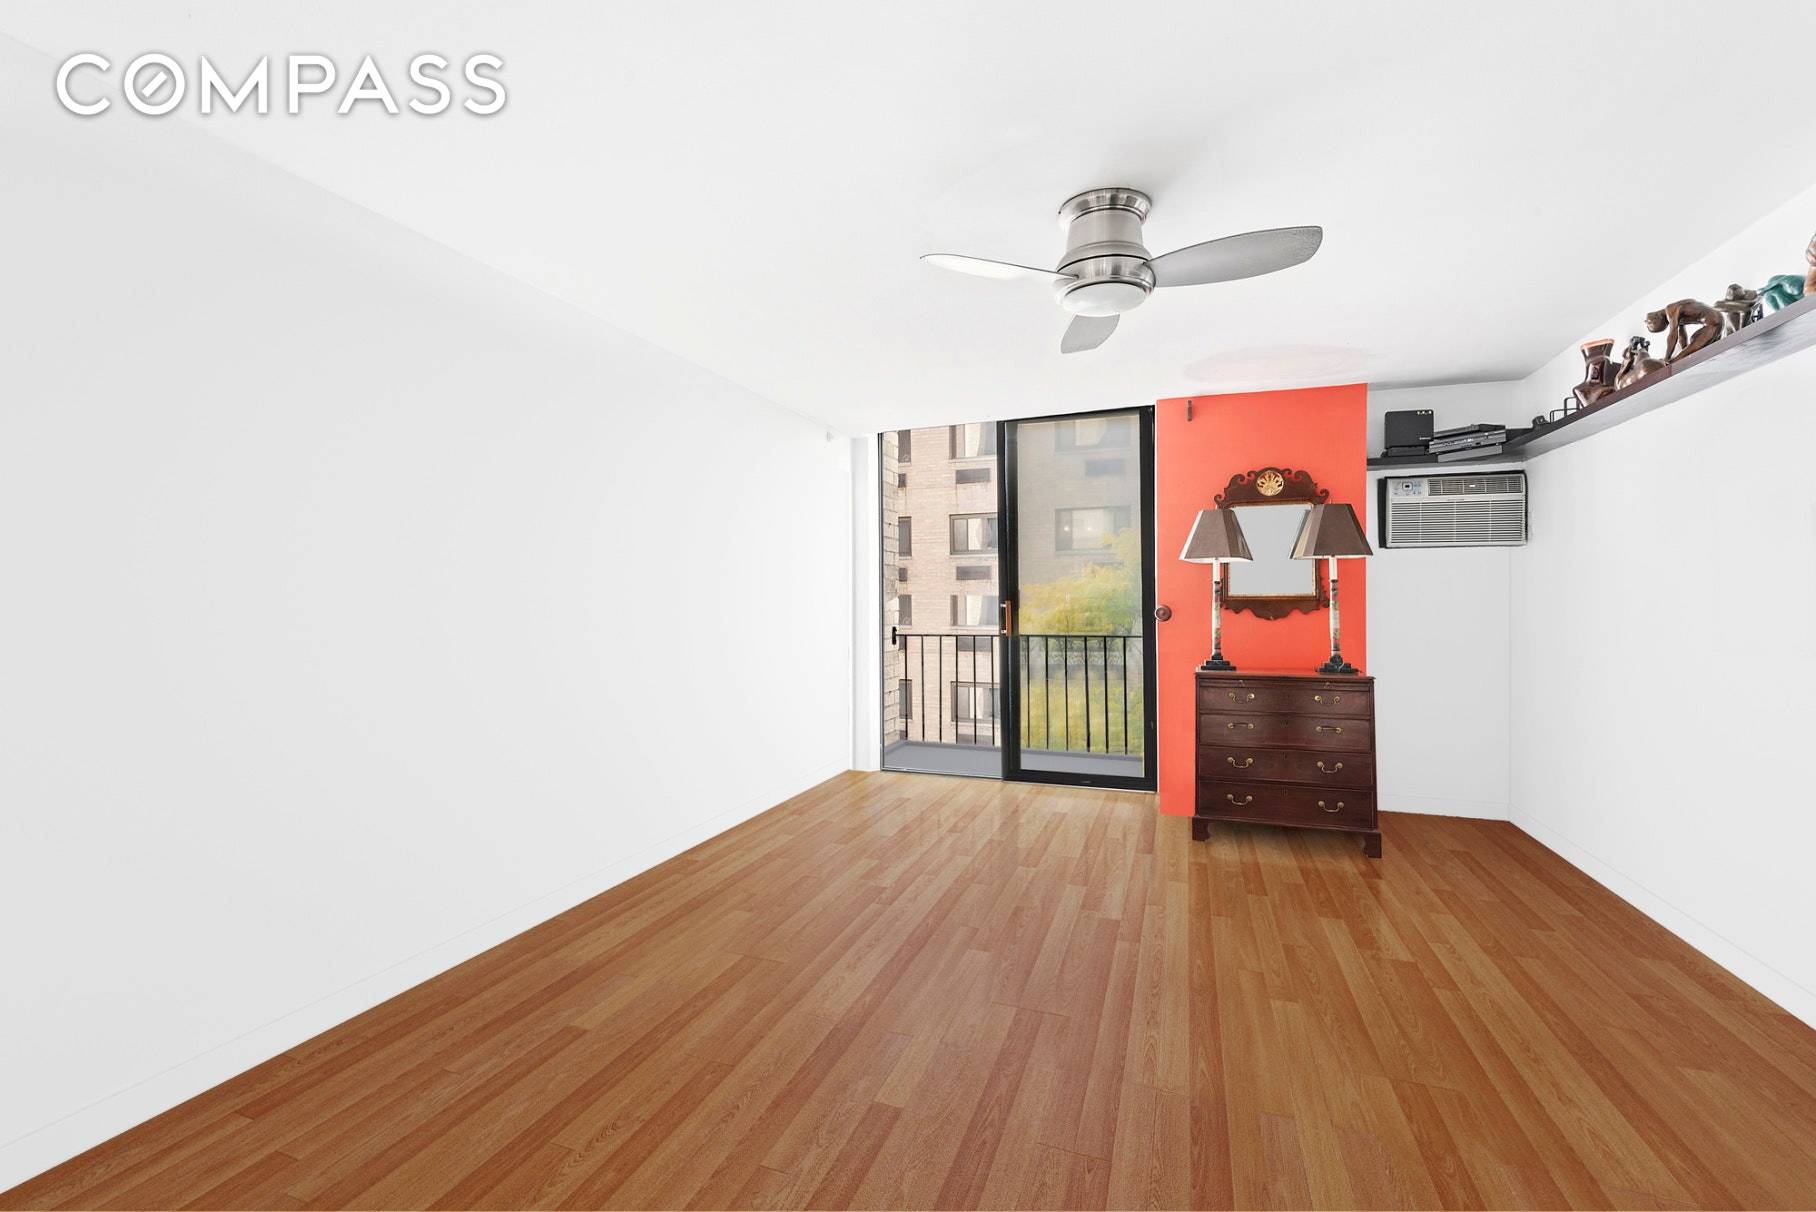 Beautiful, Sunny, Furnished, Balcony, Sunny, Studio Apartment, Gramercy park, Penny Lane Apartments, hardwood floors, Doorman, laundry on each floor, southern exposure, blue tiled kitchen, ceiling fan and a c, amazing, ...